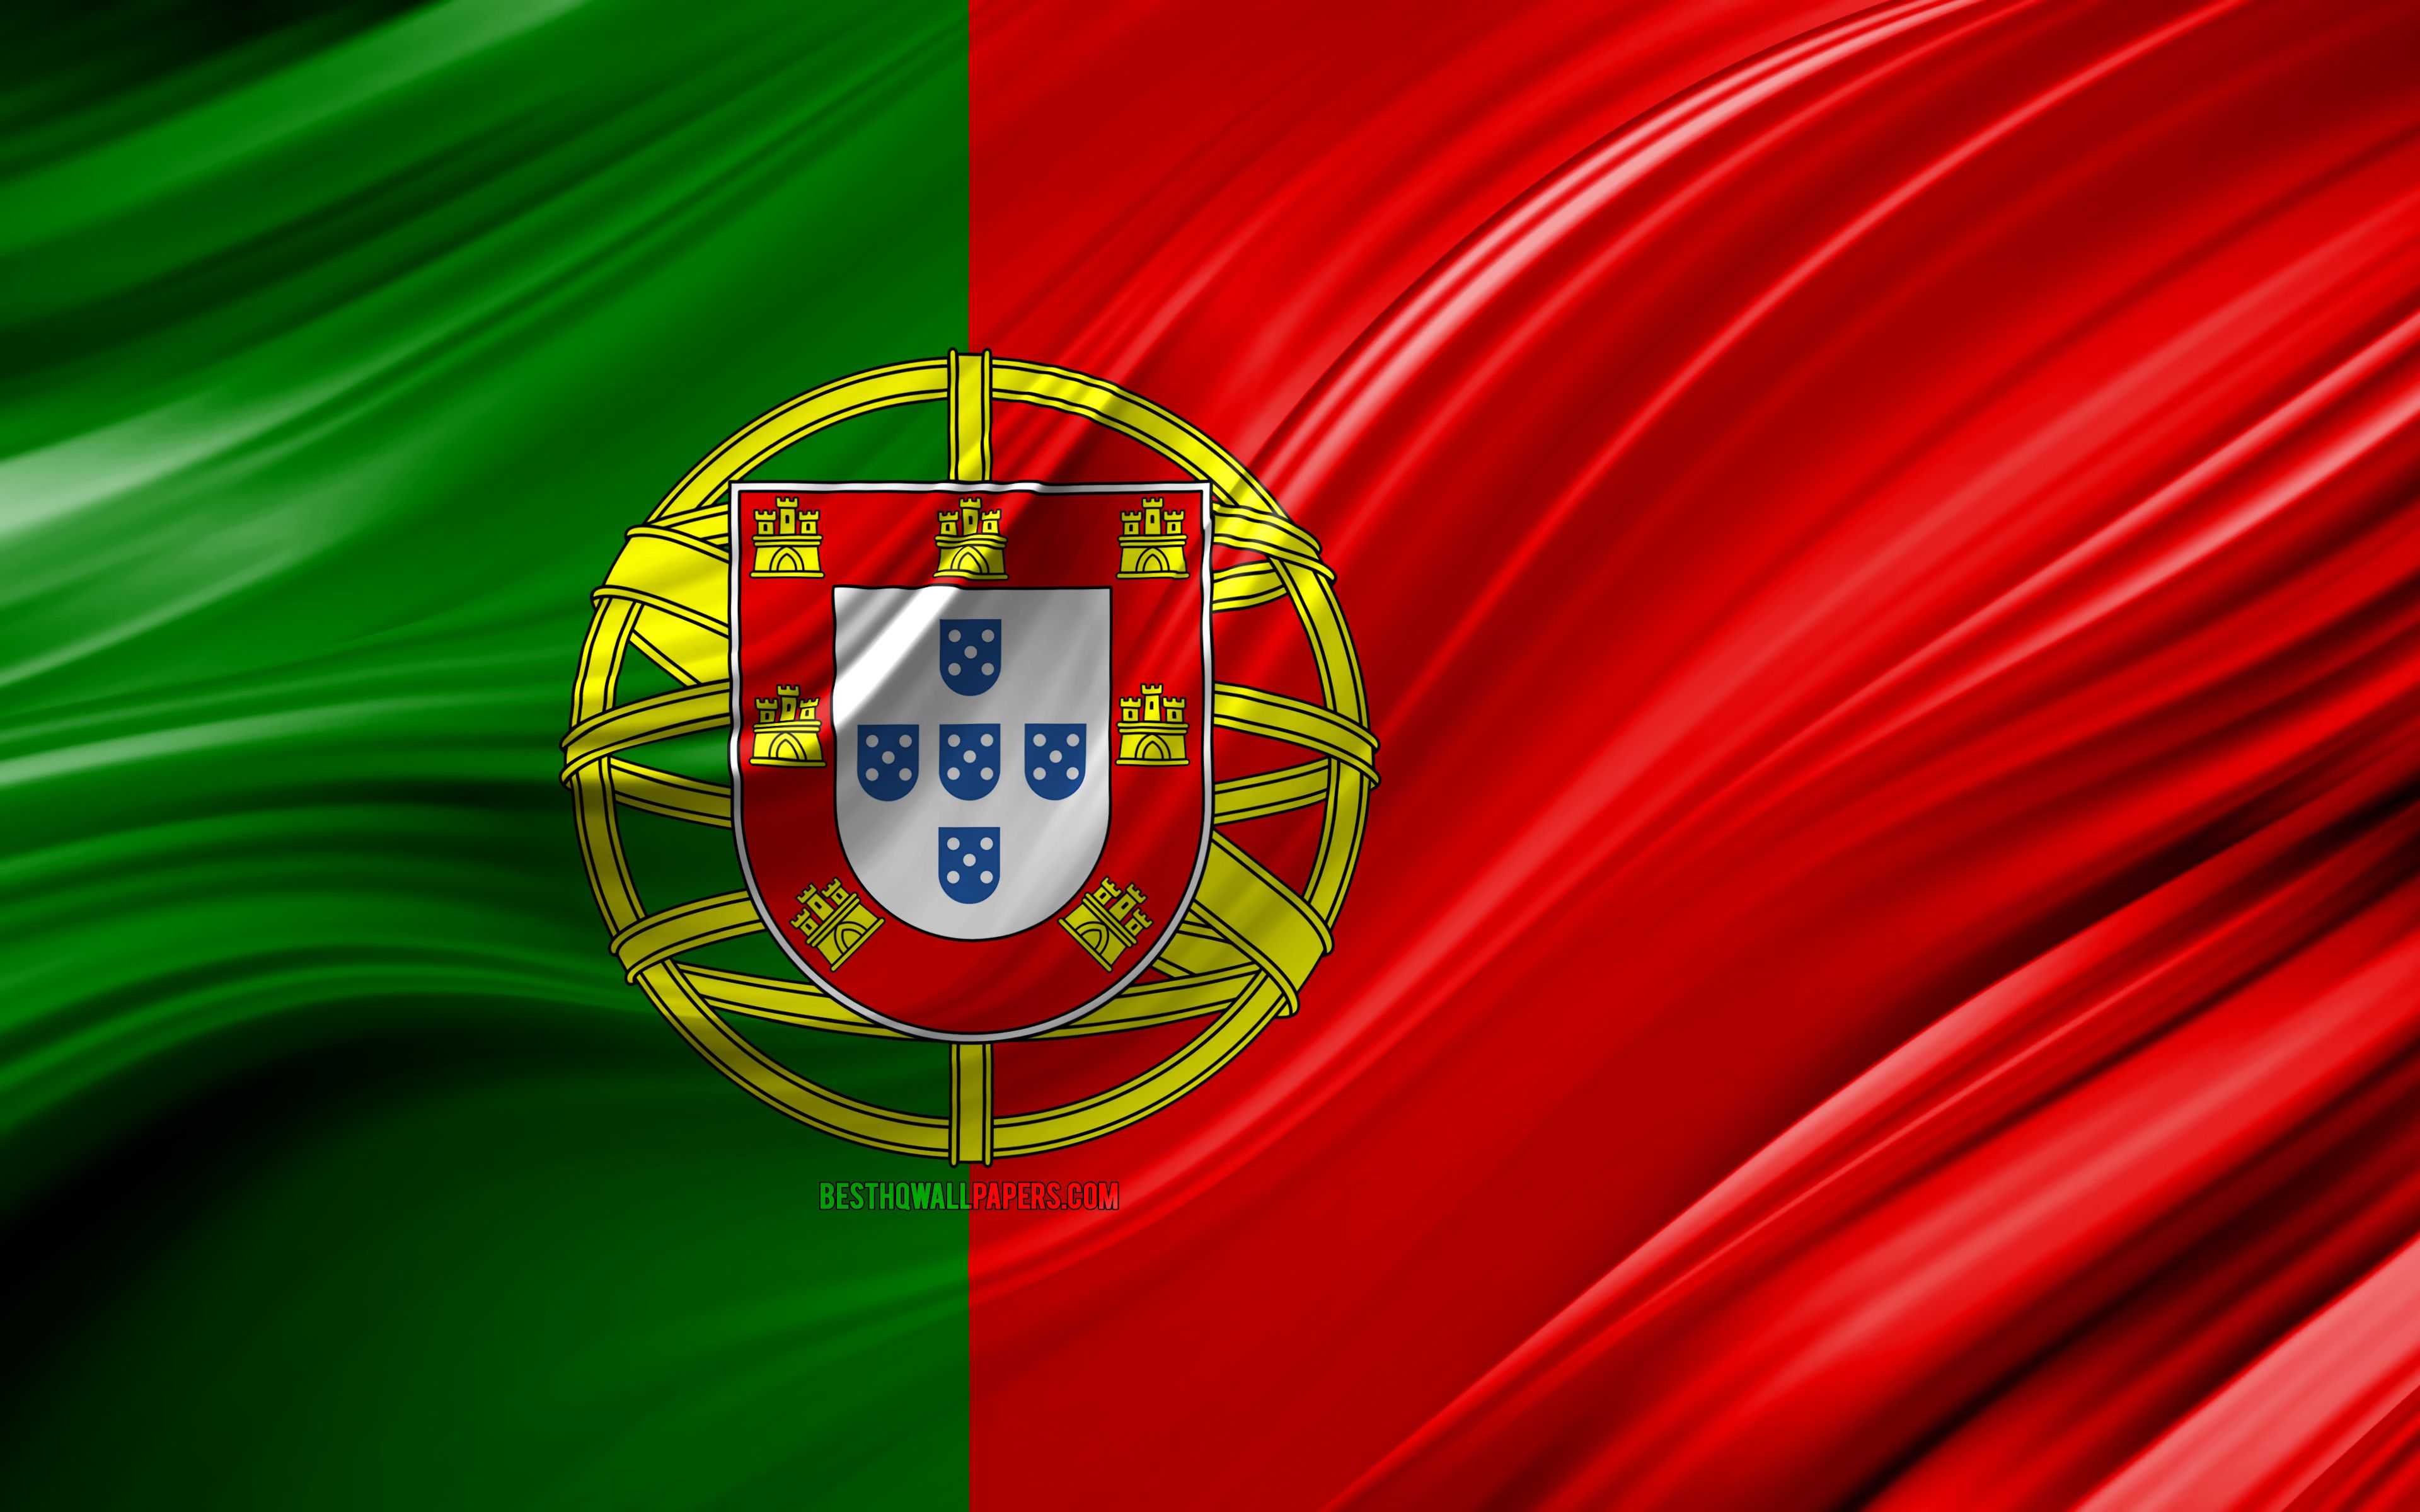 Download wallpaper 4k, Portuguese flag, European countries, 3D waves, Flag of Portugal, national symbols, Portugal 3D flag, art, Europe, Portugal for desktop with resolution 3840x2400. High Quality HD picture wallpaper